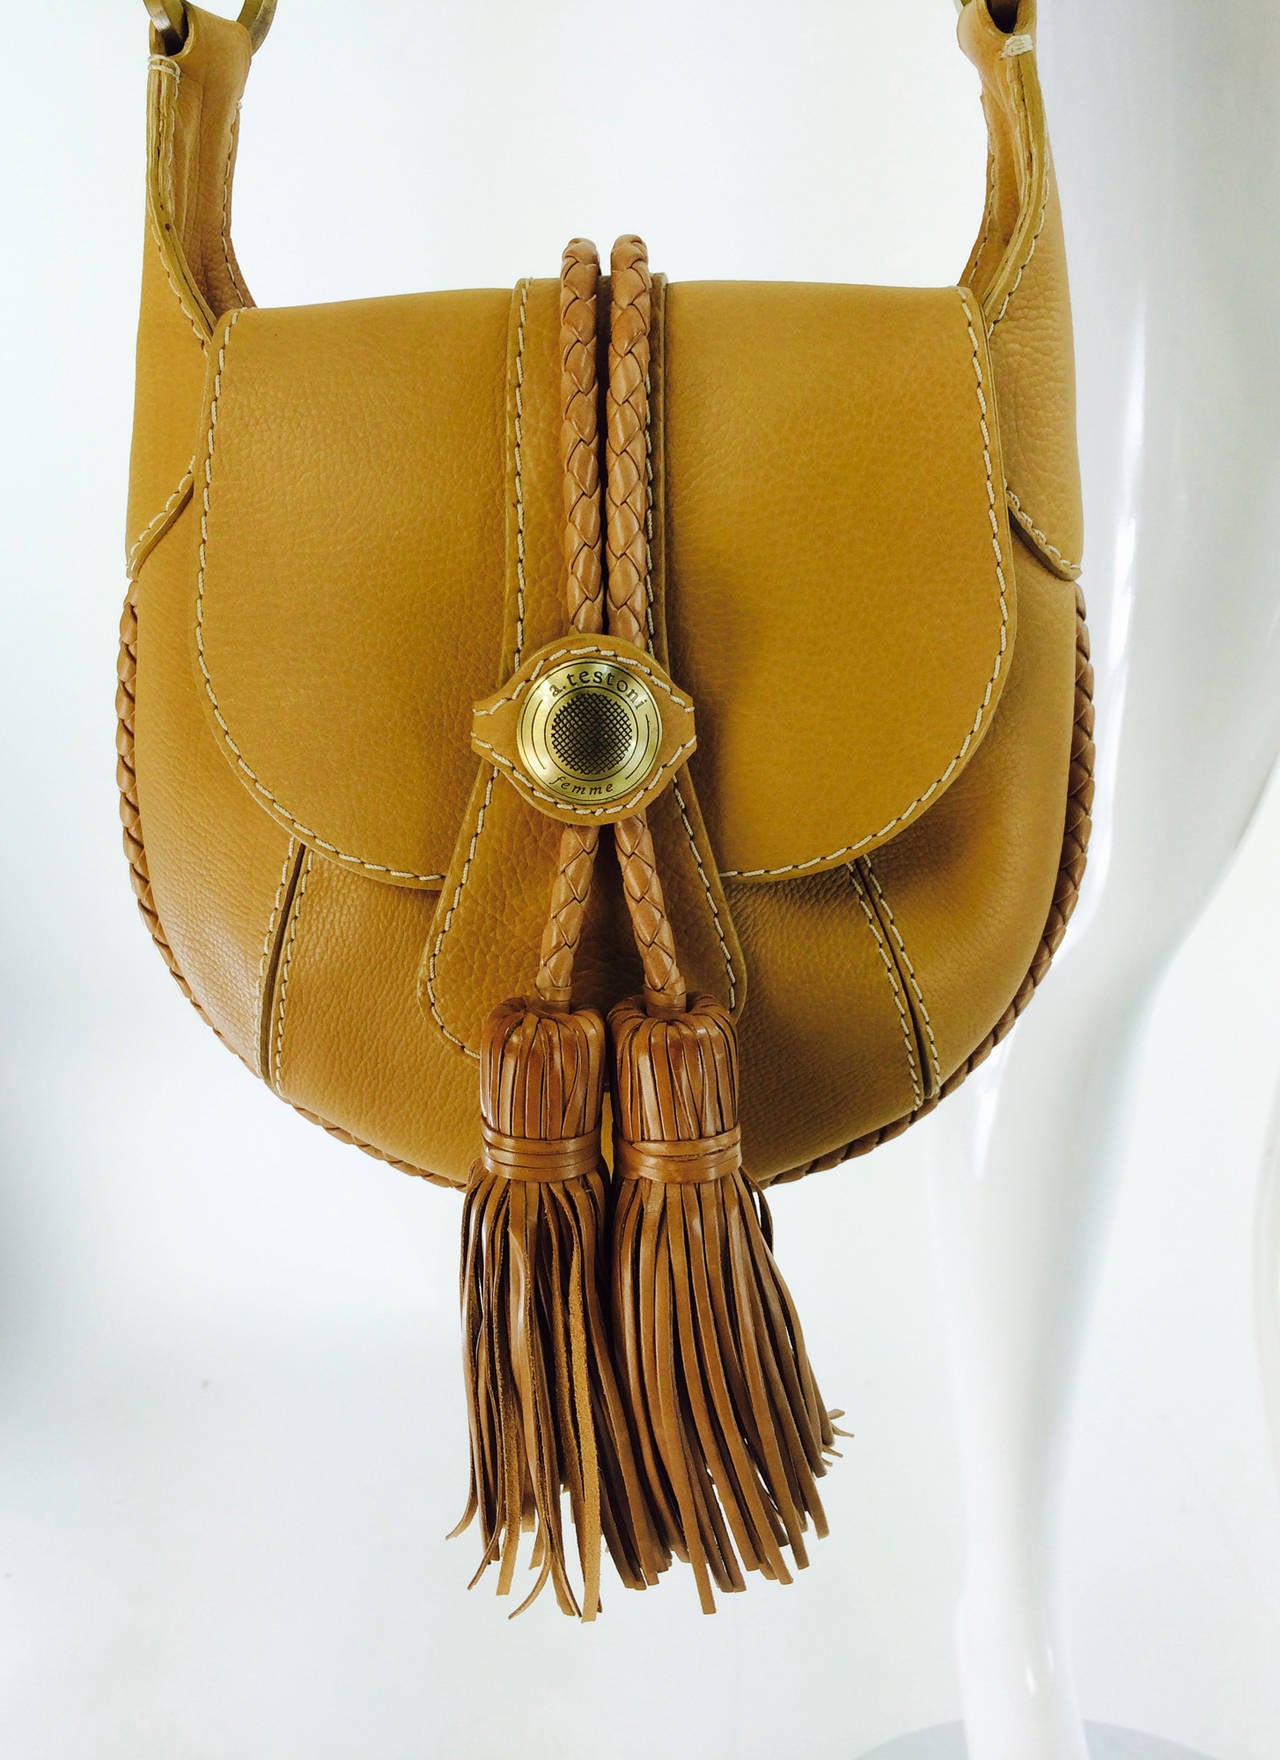 A. Testoni, femme, fringe tassel shoulder bag in warm caramel lightly textured leather...This bag is a great size and not overwhelming, fits perfectly under your arm...The bag closes with a flap that has large decorative fringe tassels with a logo